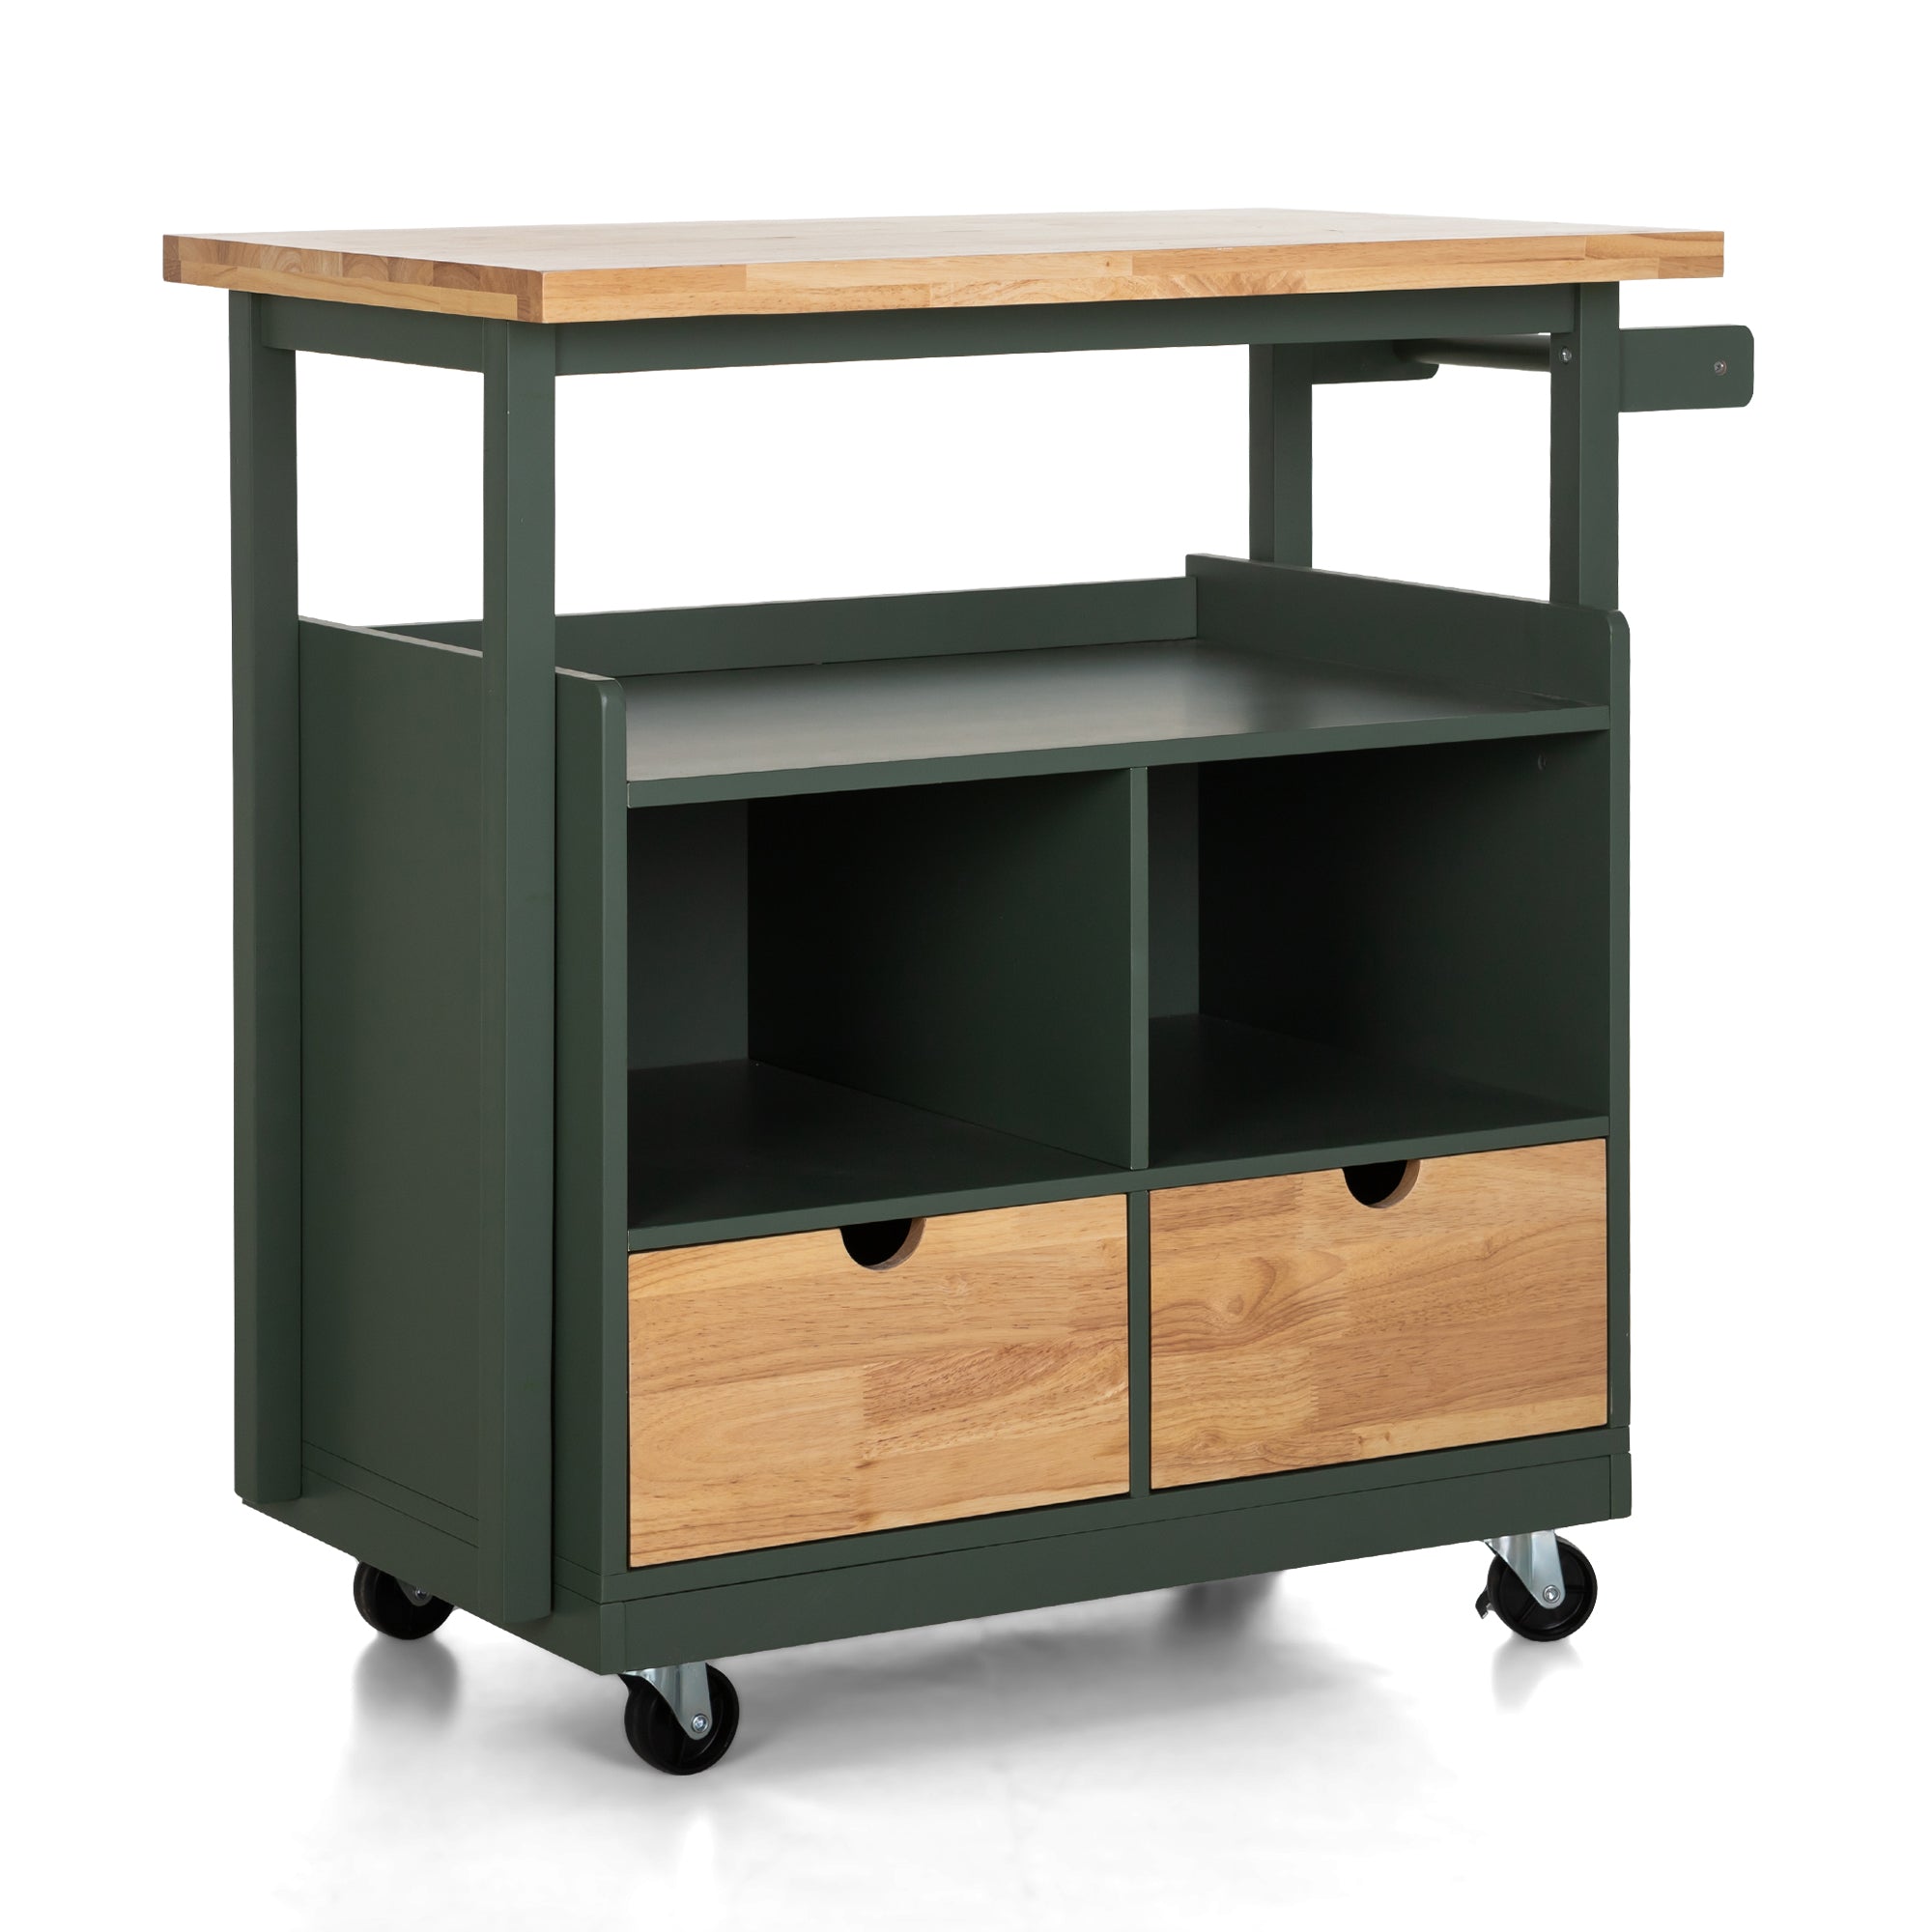 PHI VILLA Rubber Wood Tabletop Kitchen Island Cart with Drawers and Towel Rack, Green